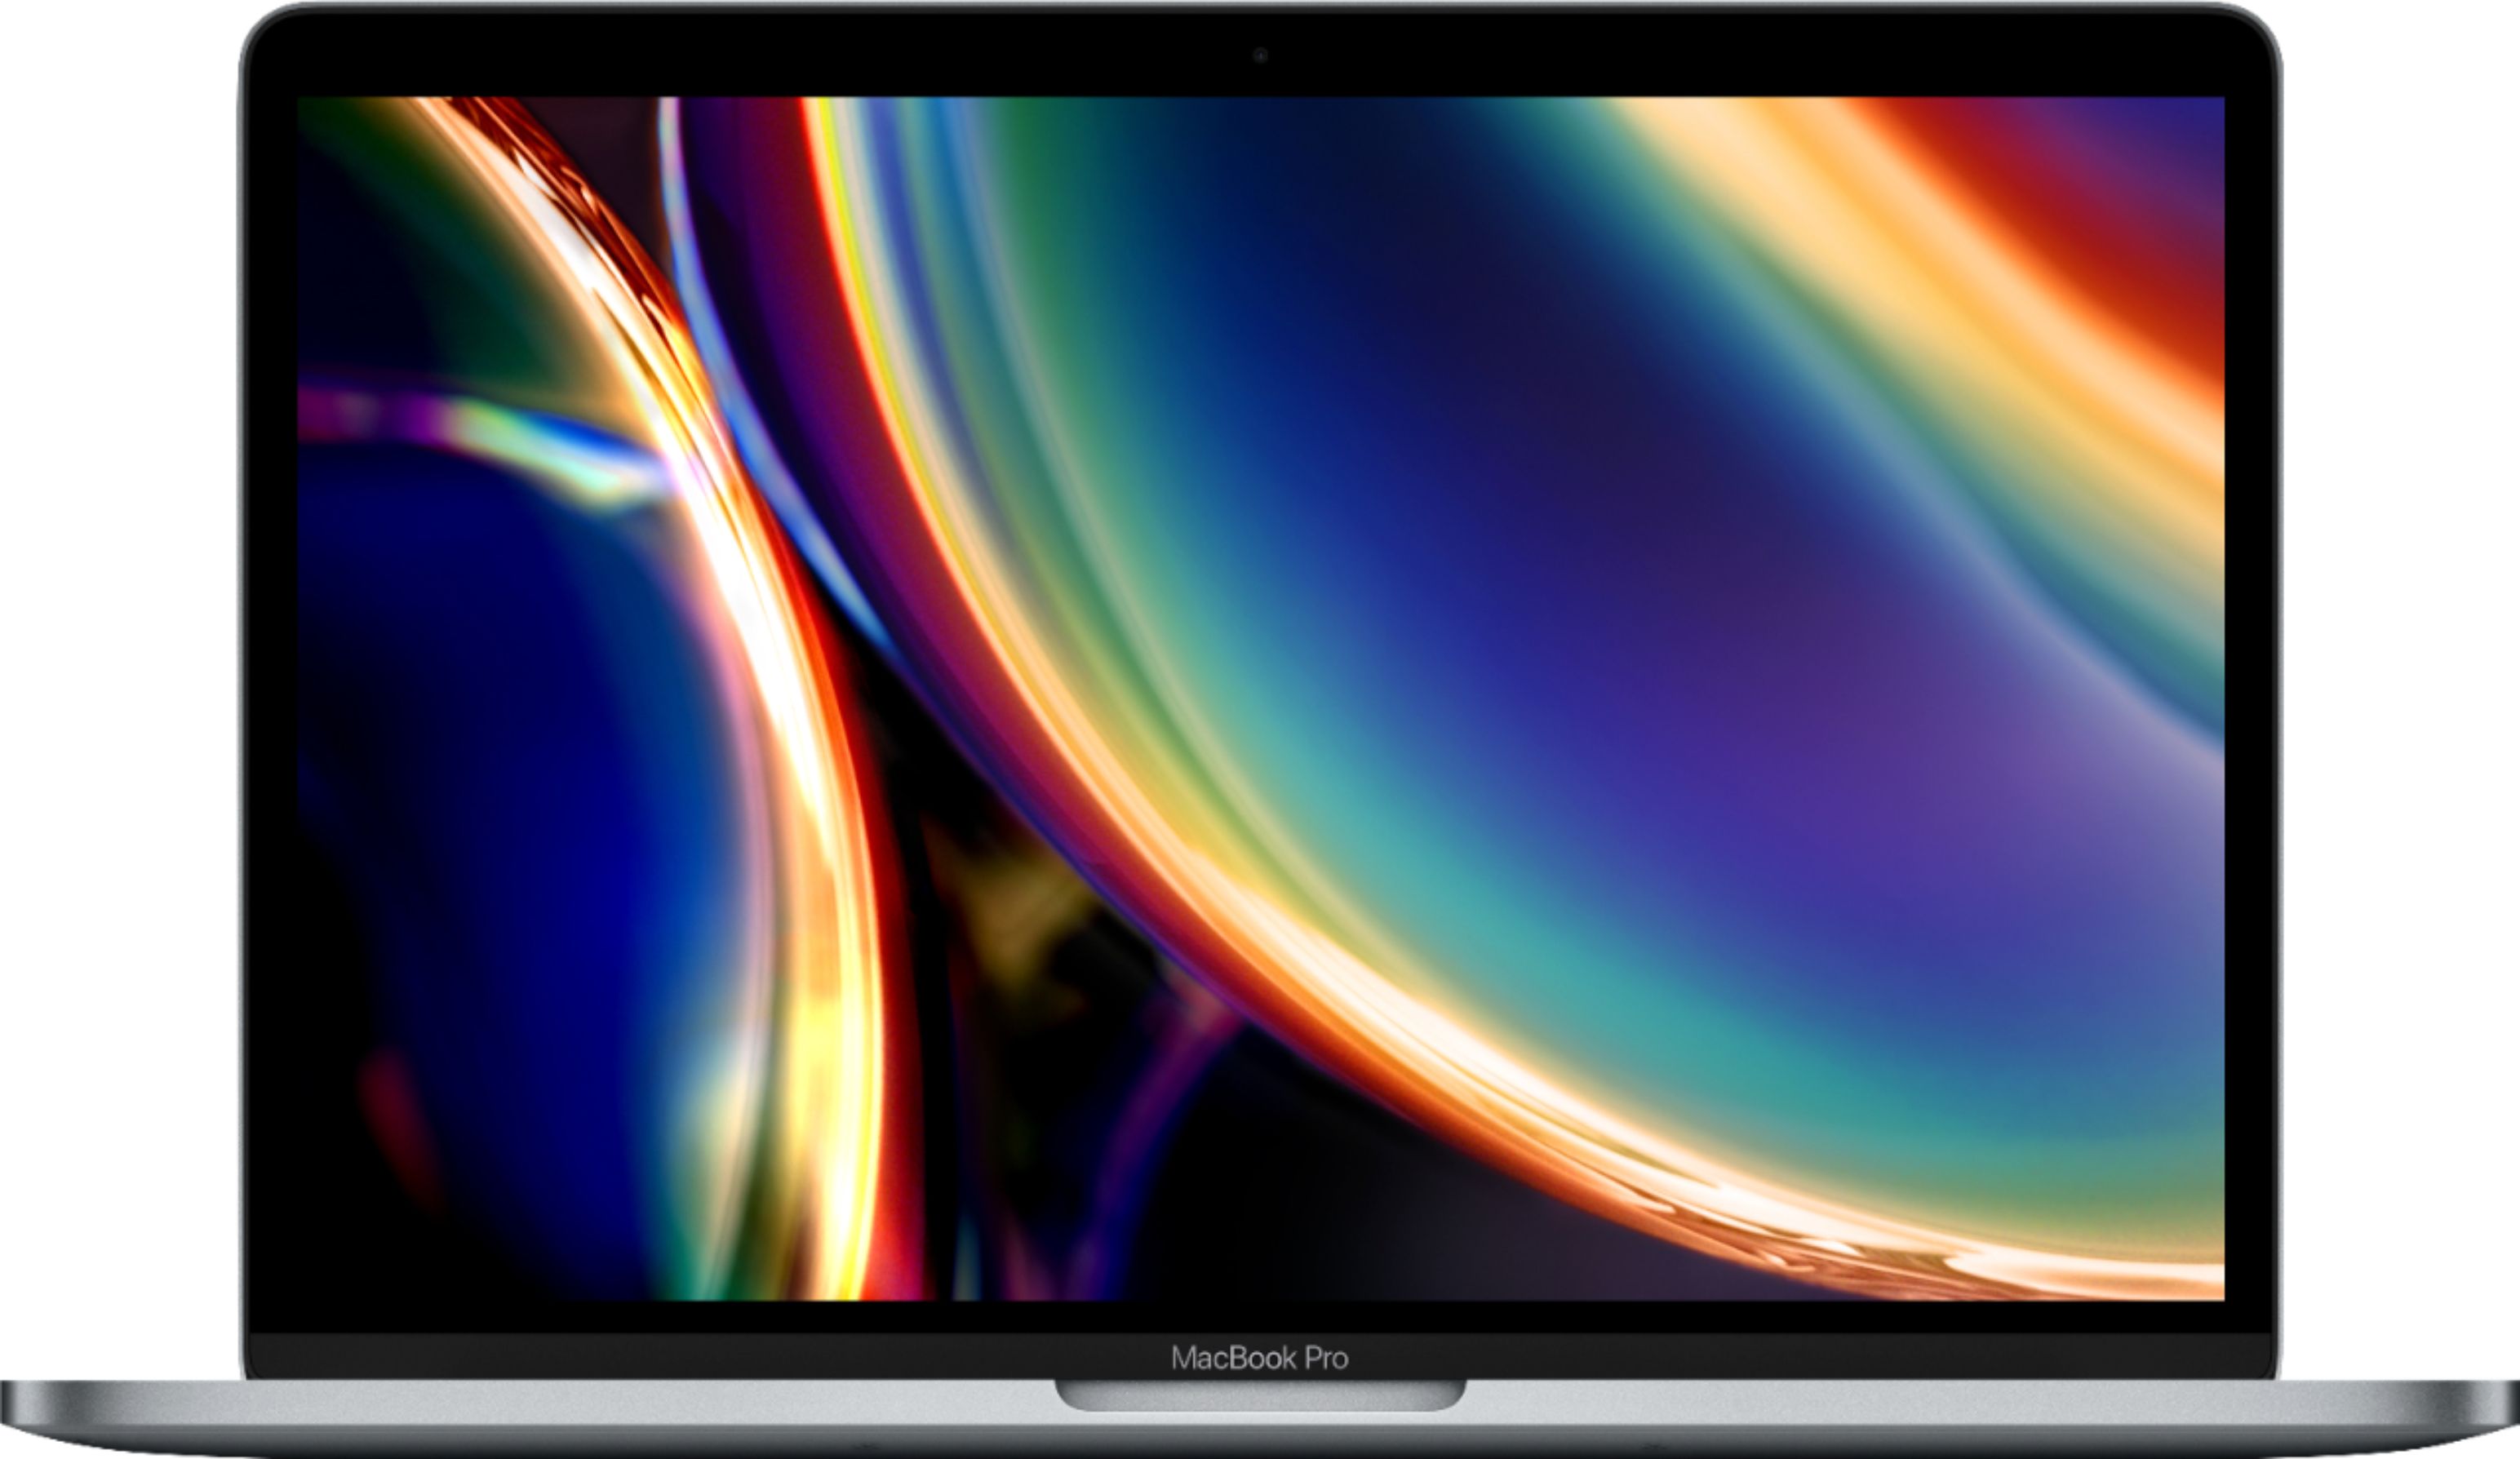 boycott Korea sail Apple MacBook Pro 13" Display with Touch Bar Intel Core i5 16GB Memory  512GB SSD Space Gray MWP42LL/A - Best Buy